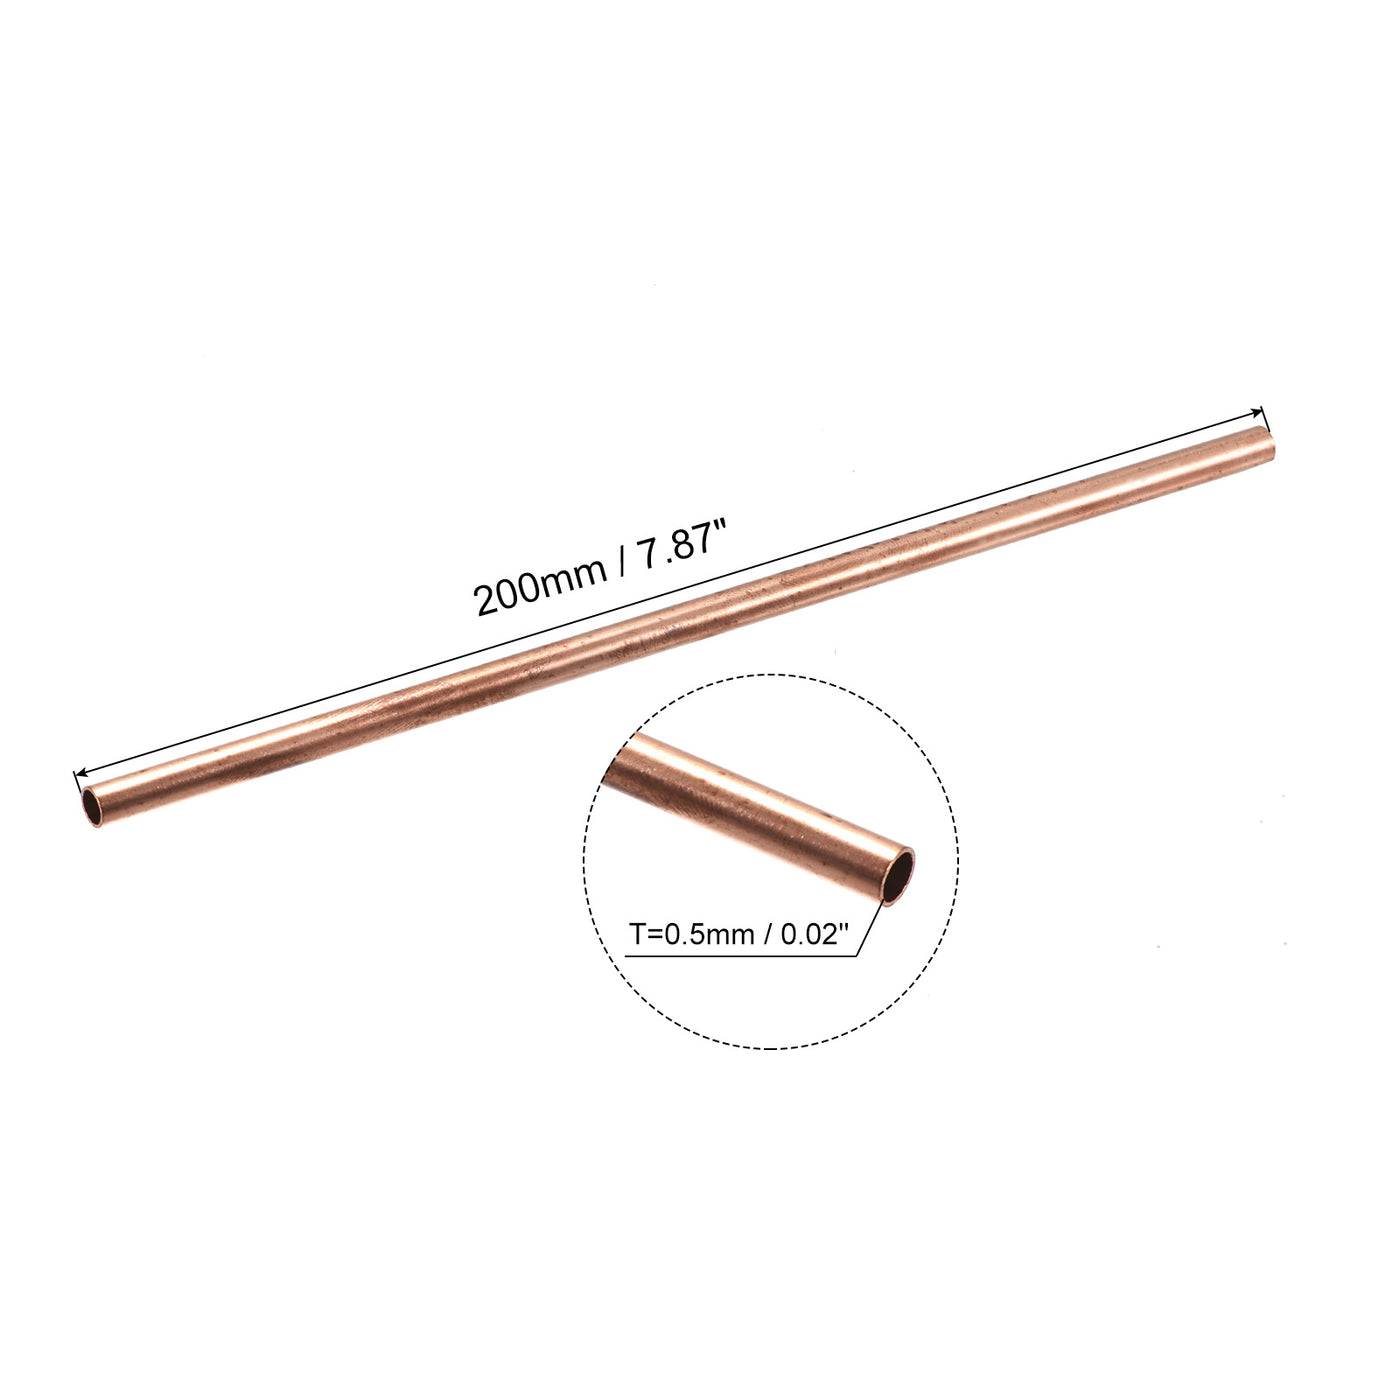 uxcell Uxcell Copper Tube, 8mm 9mm 10mm 11mm 12mm 13mm OD x 0.5mm Wall Thickness 200mm Length Metal Tubing, Pack of 6